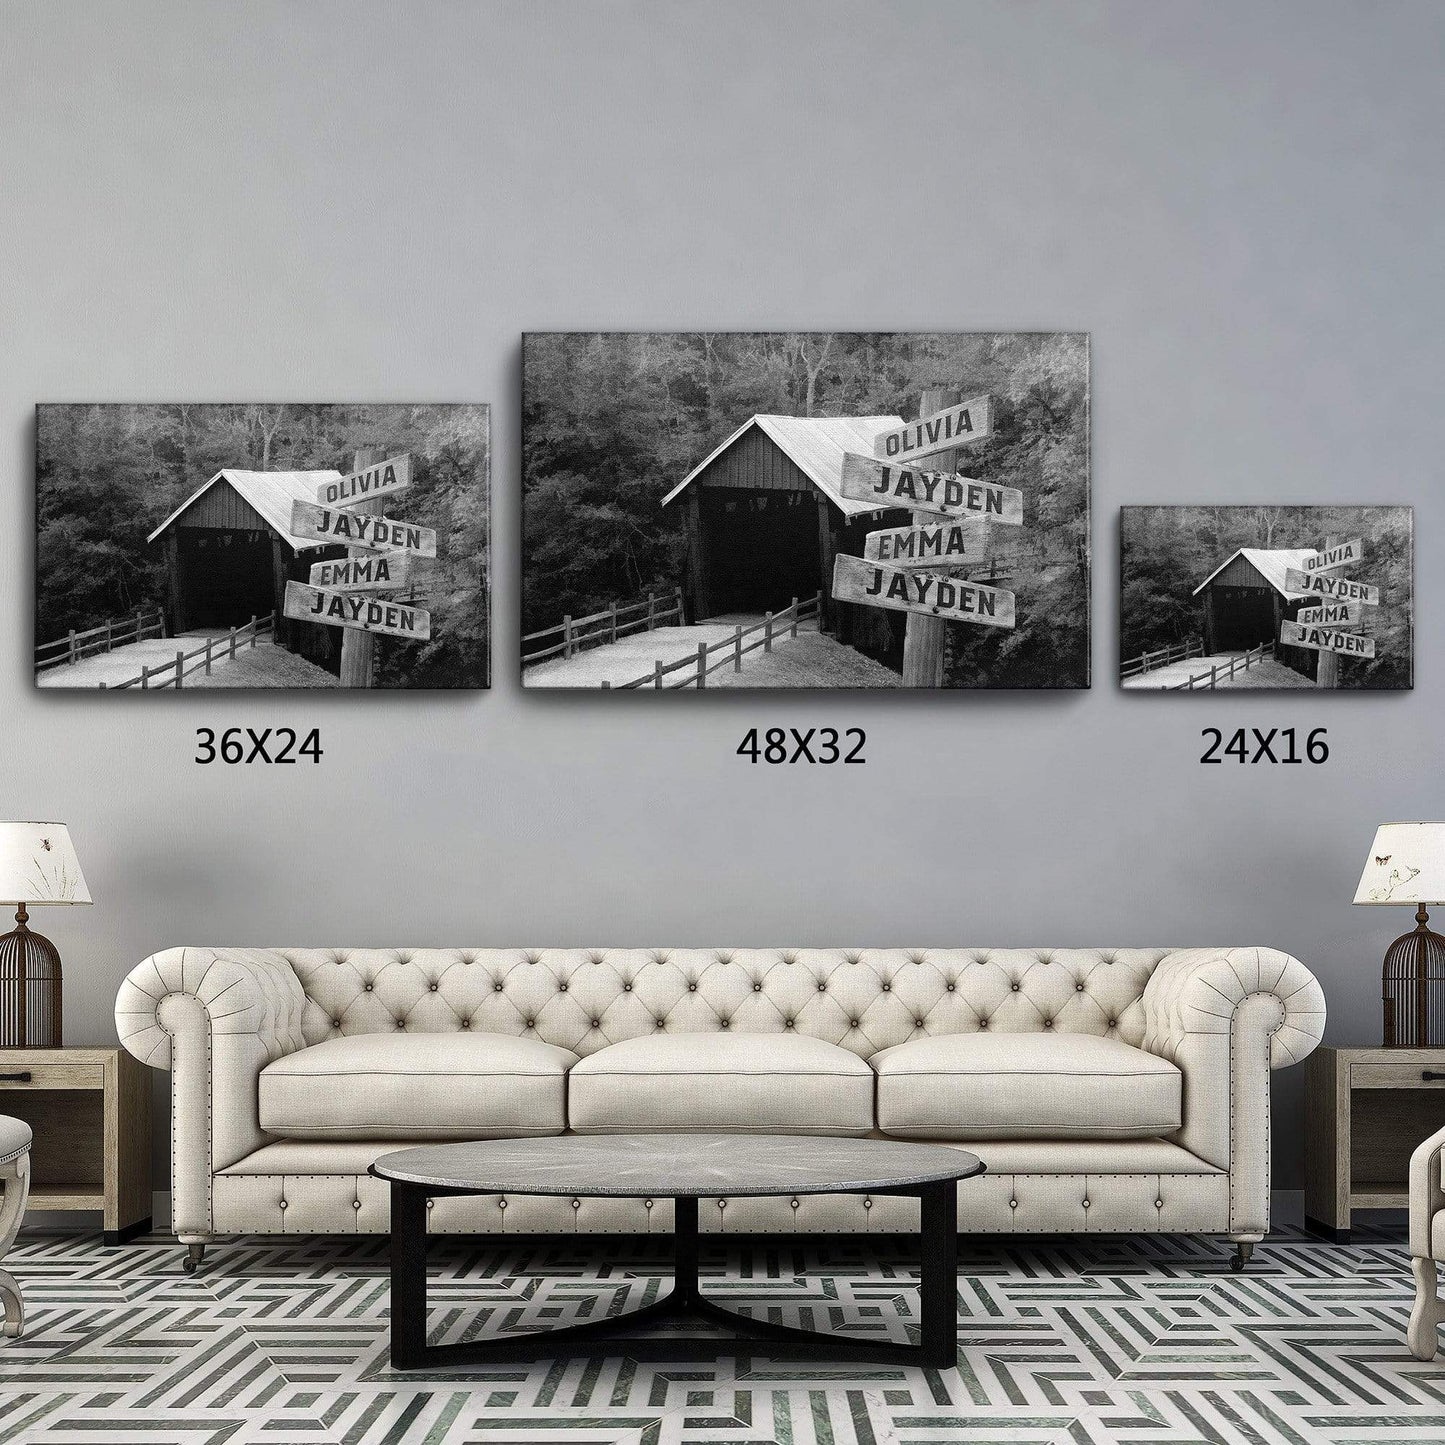 Customized Canvas Covered Bridge Black And White Customized Canvas With Multi Names